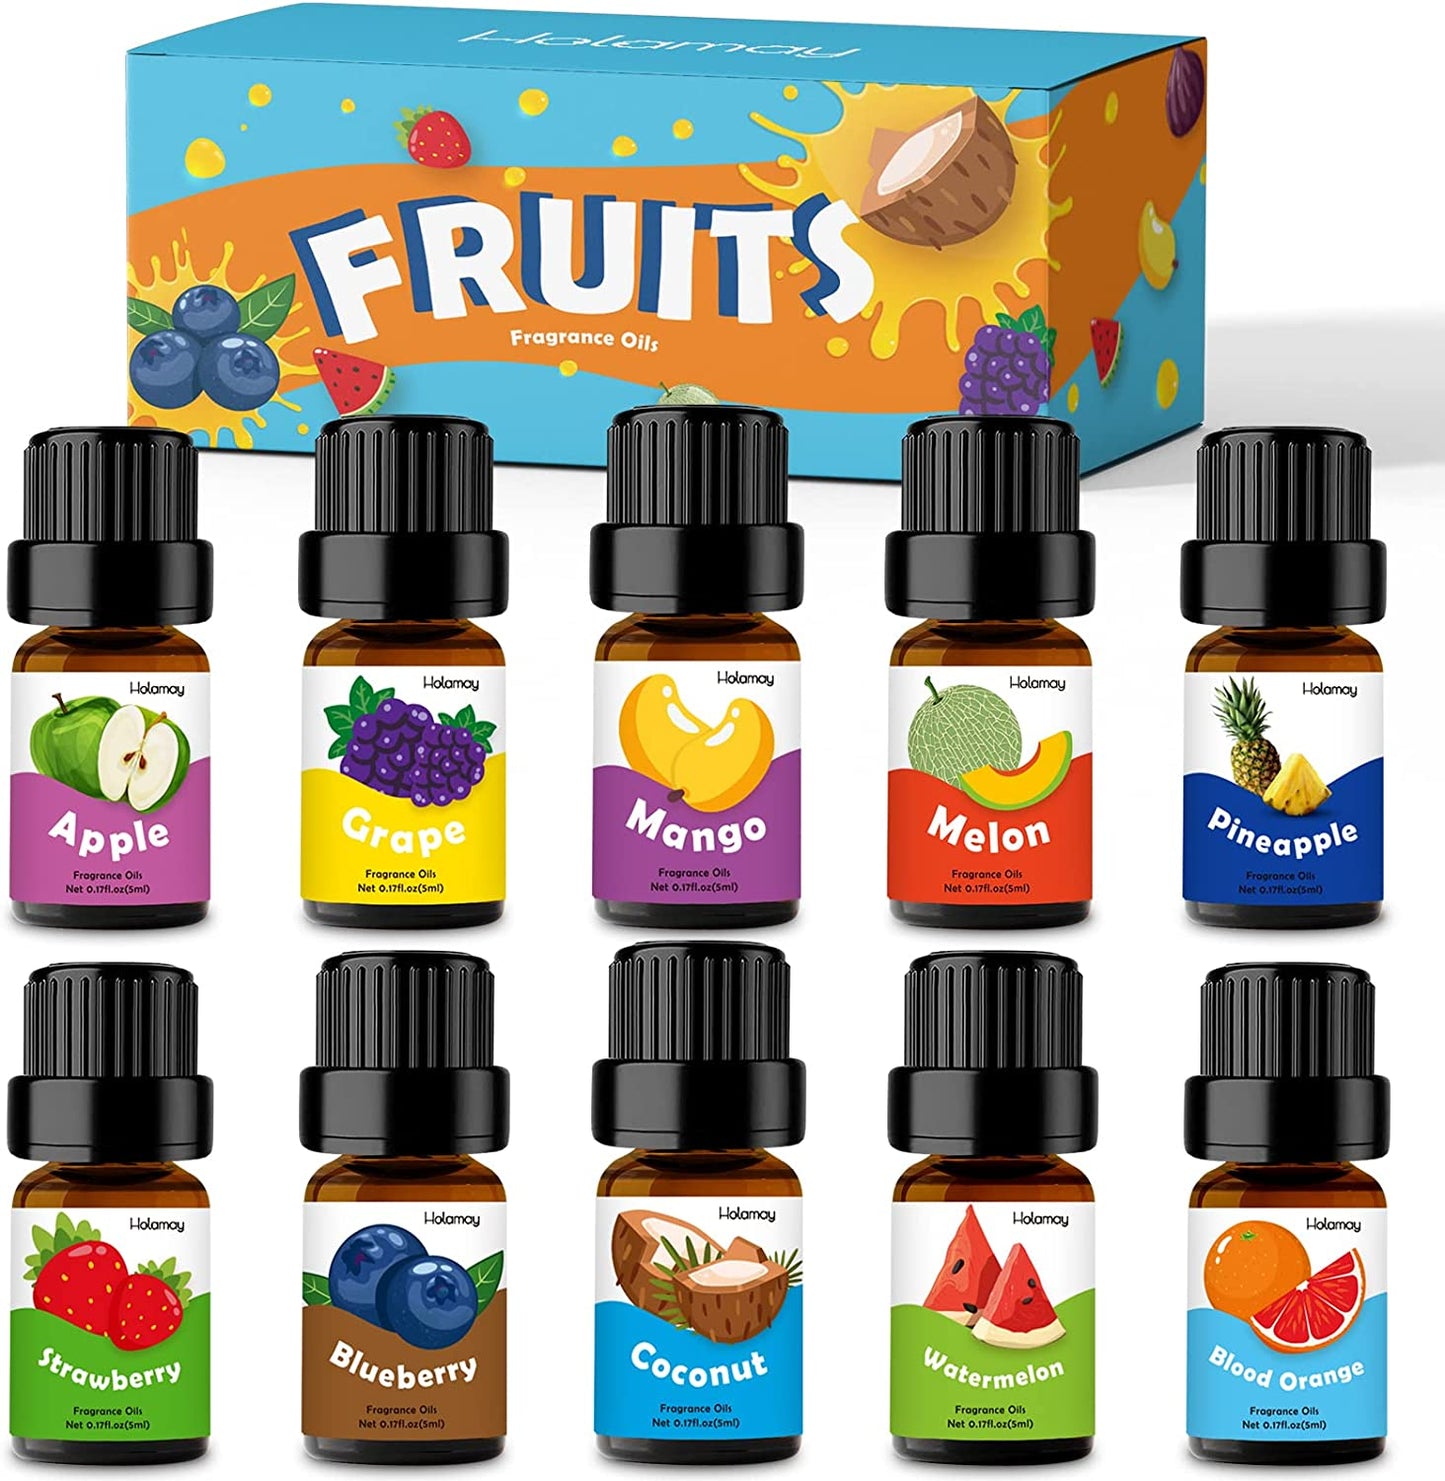 Fruity Fragrance Oil for Candle & Soap Making,  Premium Essential Oils 5Ml X 10 - Coconut, Strawberry, Mango, Pineapple, Summer Aromatherapy Diffuser Oils Set